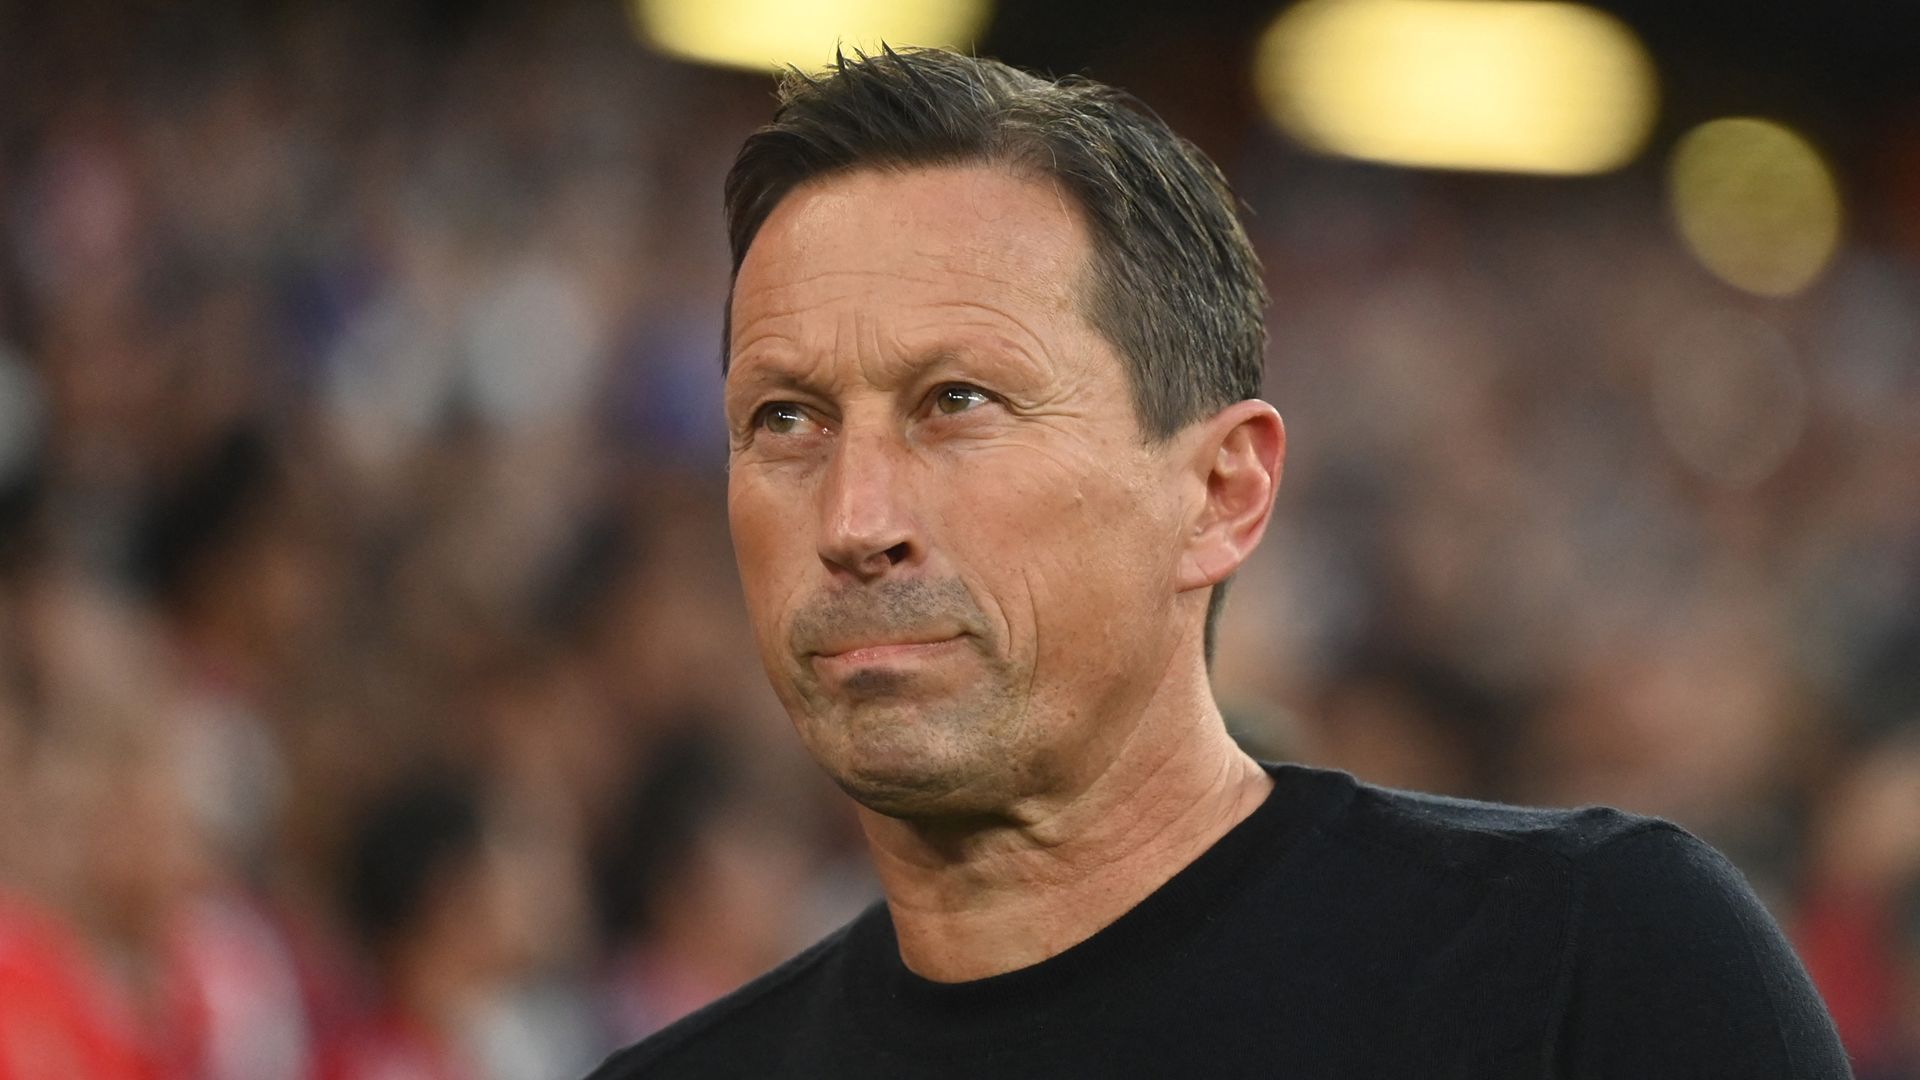 'i'm not on the market' - bayern munich rejected by yet another coach as benfica boss roger schmidt distances himself from links to german giants